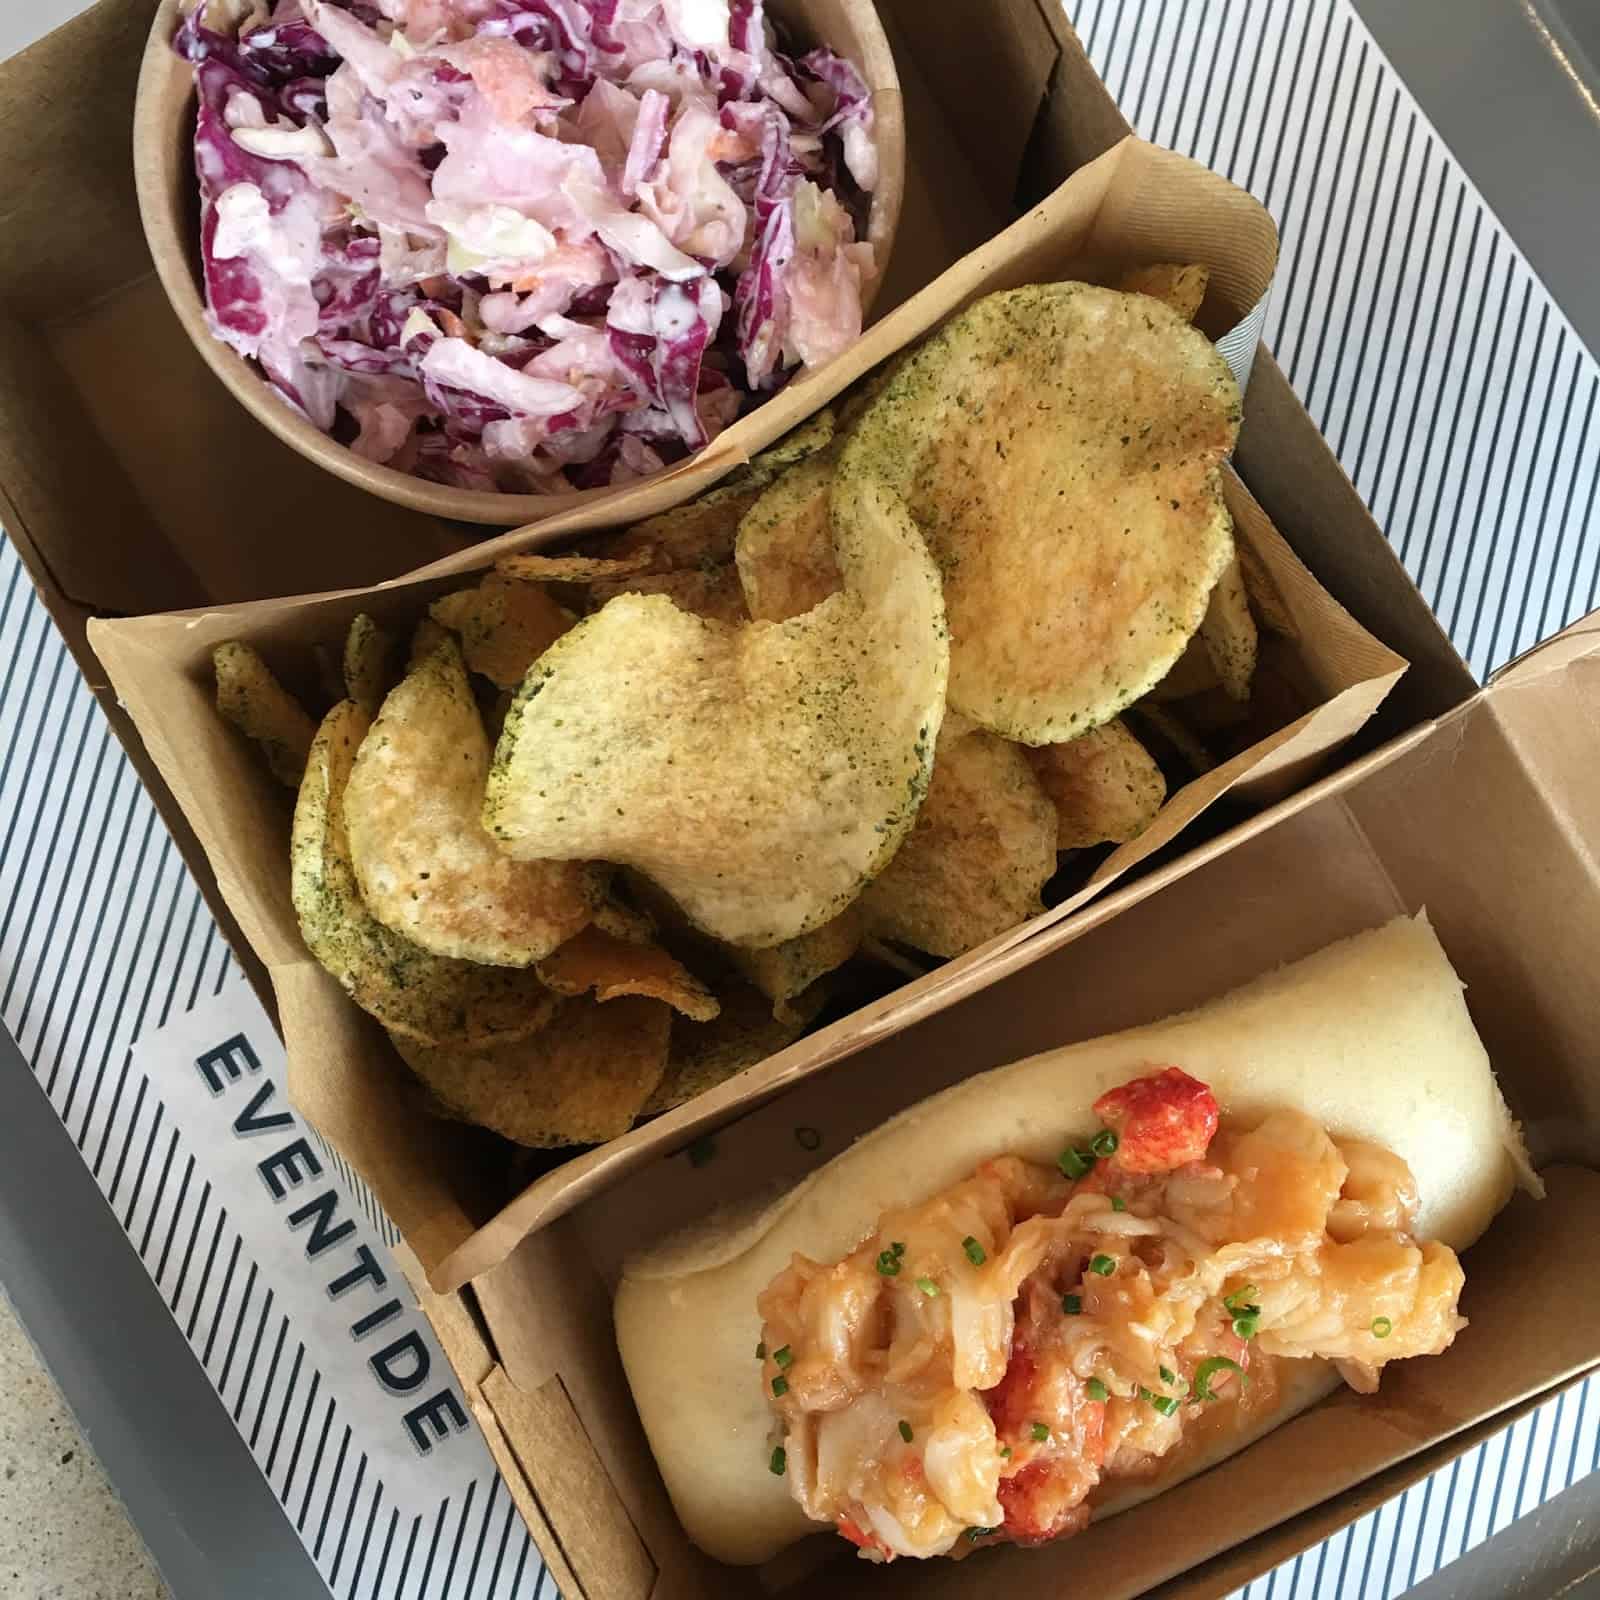 Eventide lunch box - lobster roll, chips, cole slaw